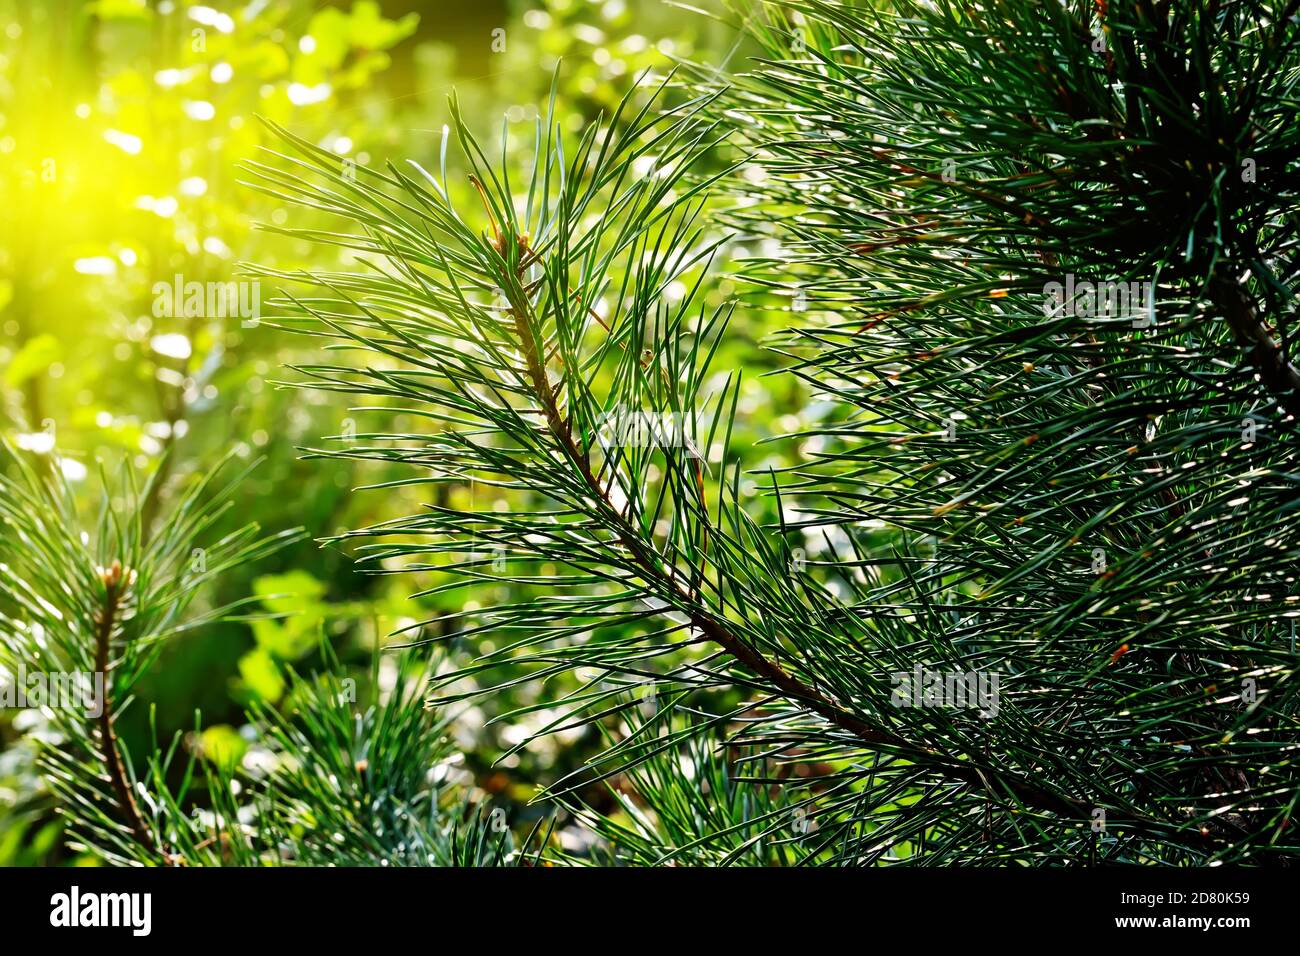 Pine branches close-up in the background light. Beautiful natural background Stock Photo